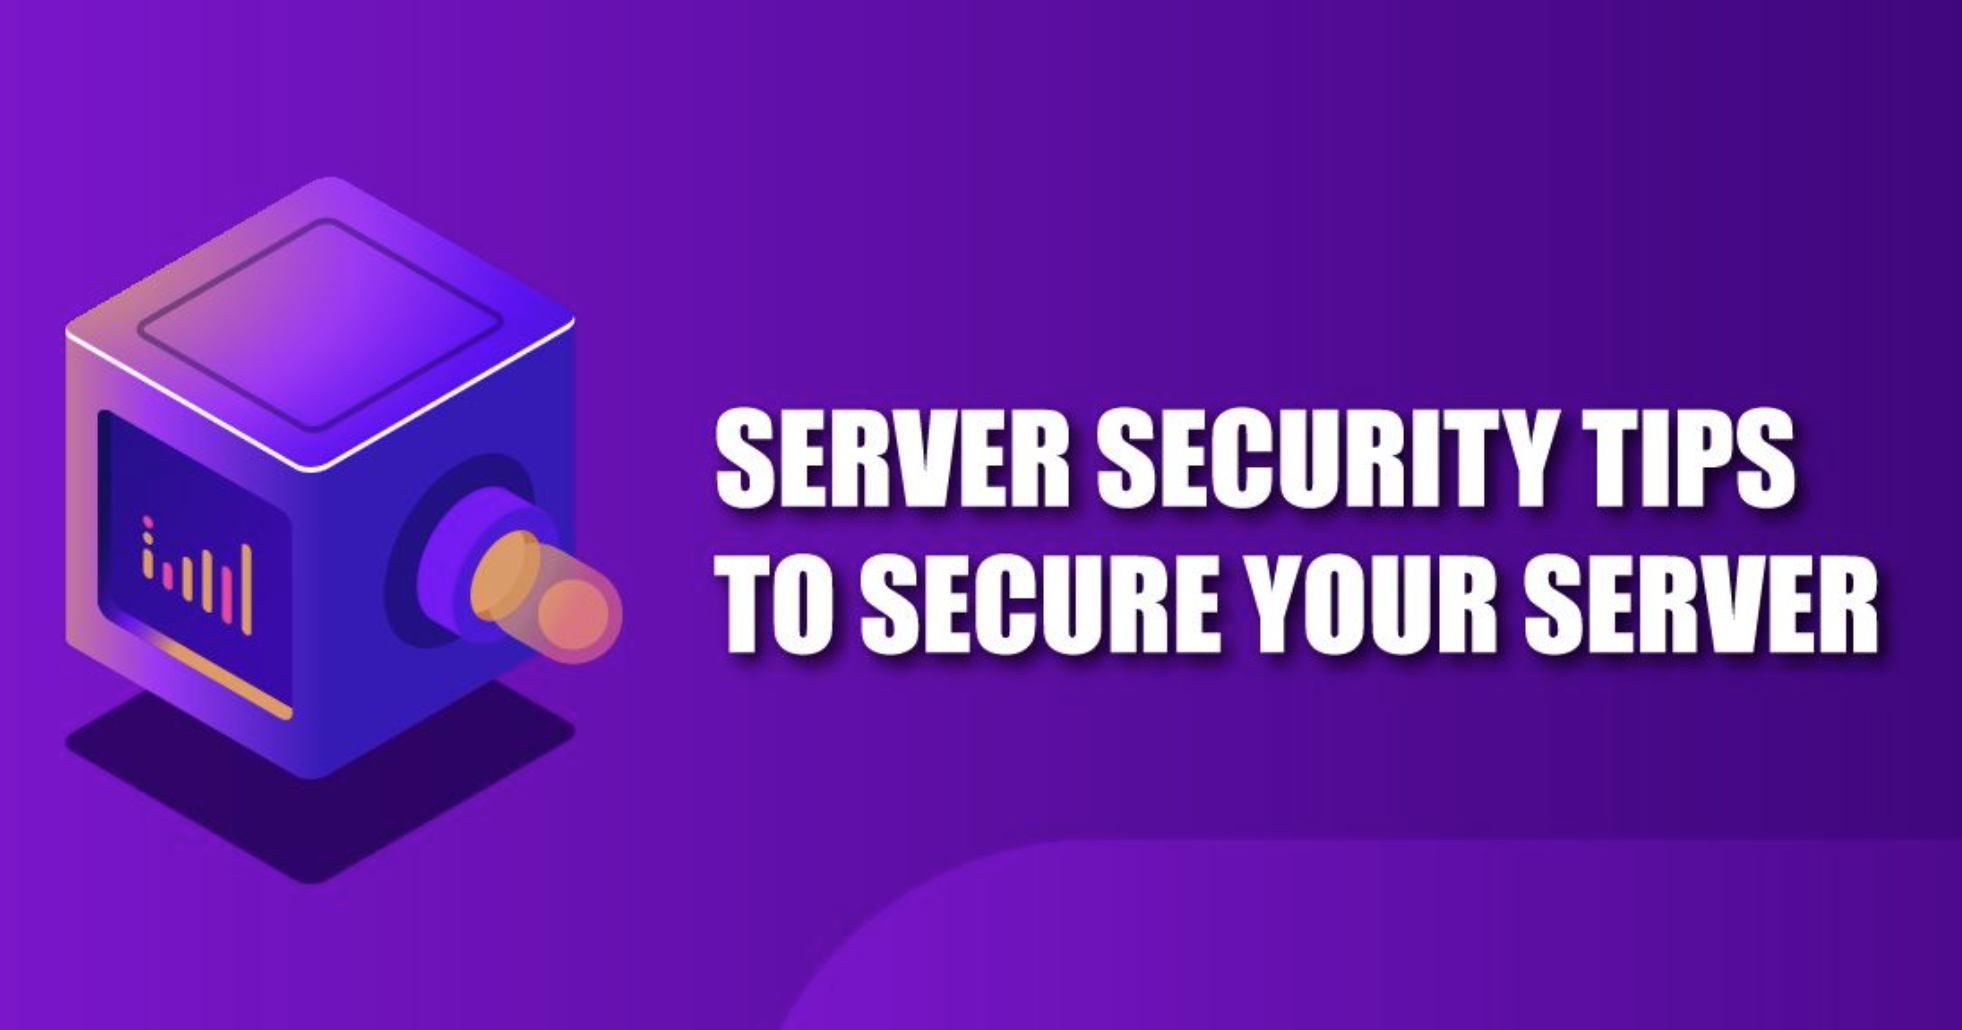 Steps to Secure Your Server from Being Hacked